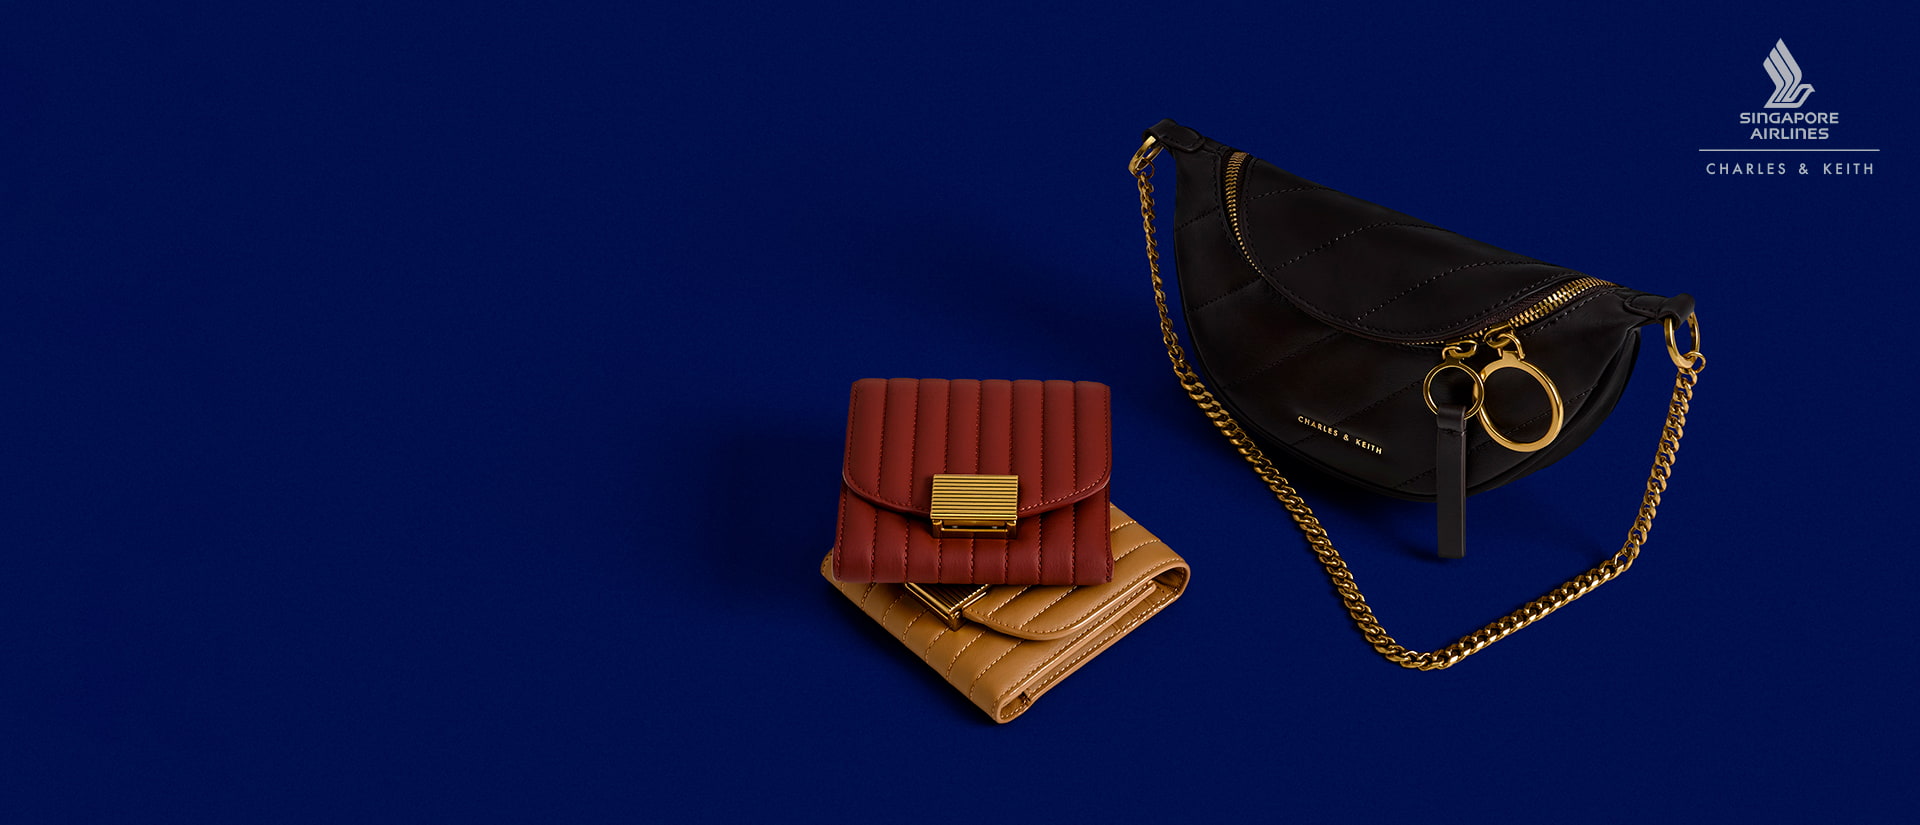 CHARLES & KEITH x Singapore Airlines: Brielle Upcycled Leather Wallet in camel and brick; Philomena Upcycled Leather Crossbody Bag in brown  - CHARLES & KEITH